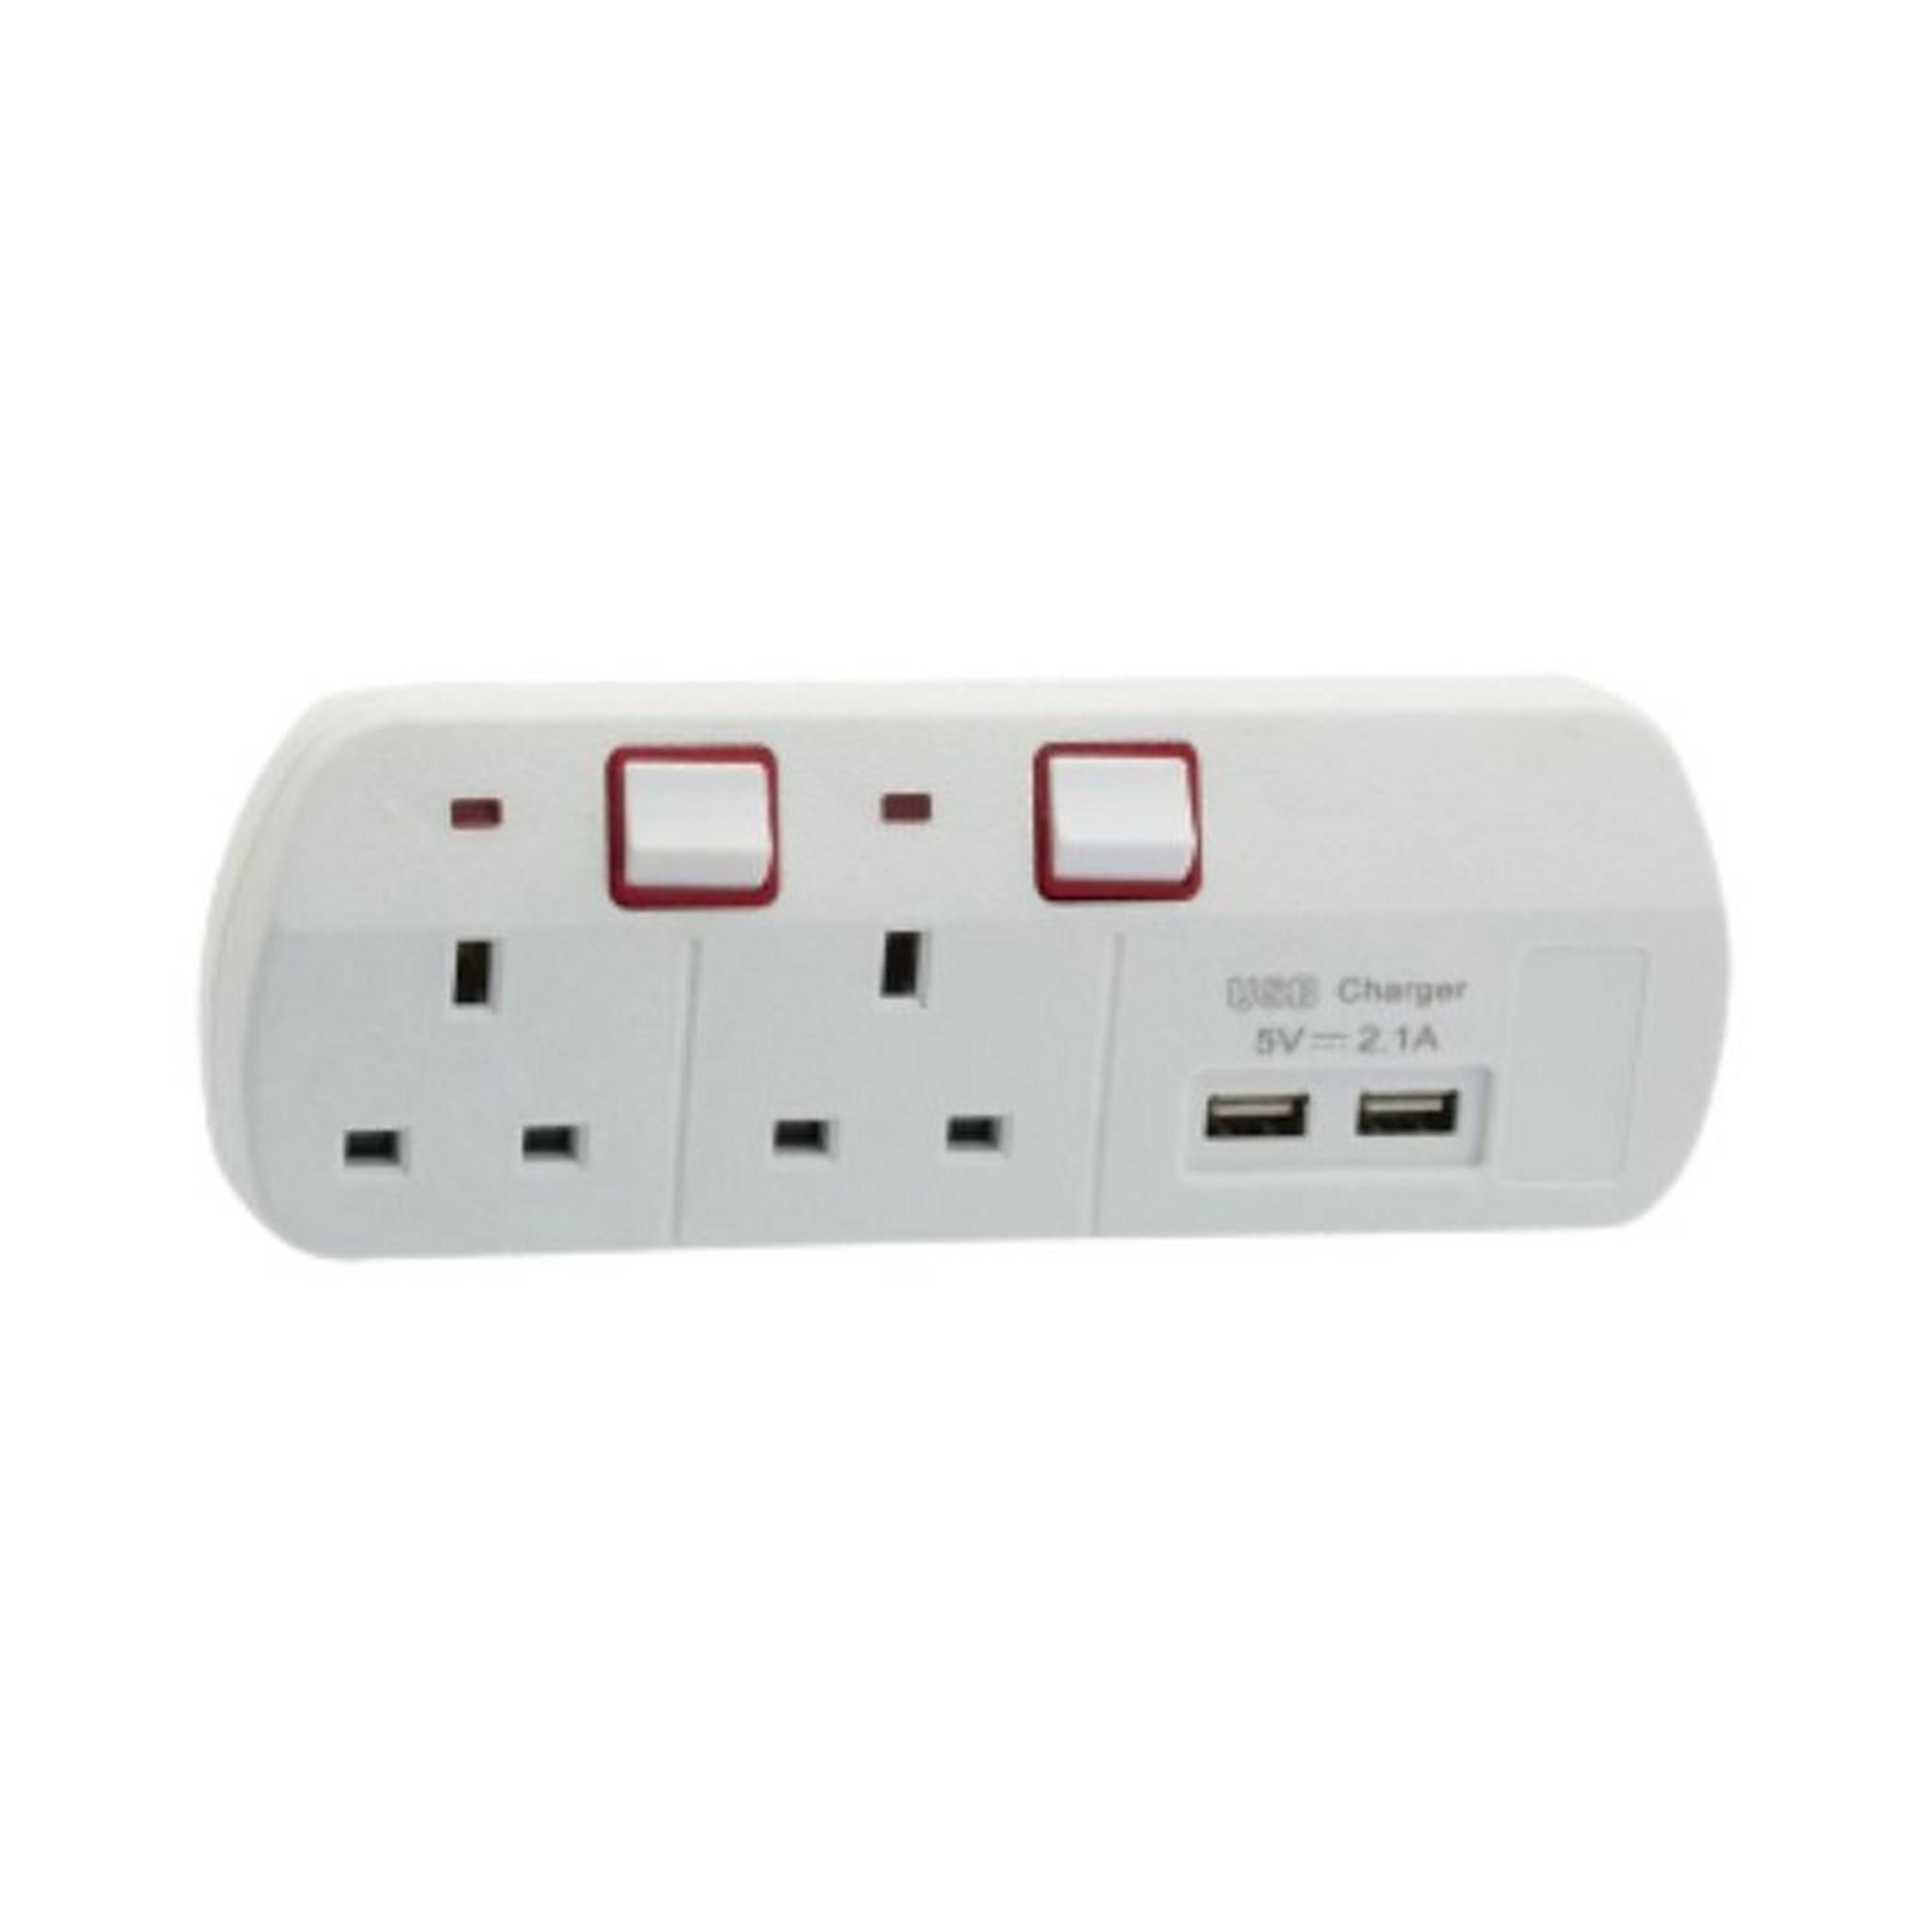 Datazone 2 way output with 2 USB ports home charger - 2m